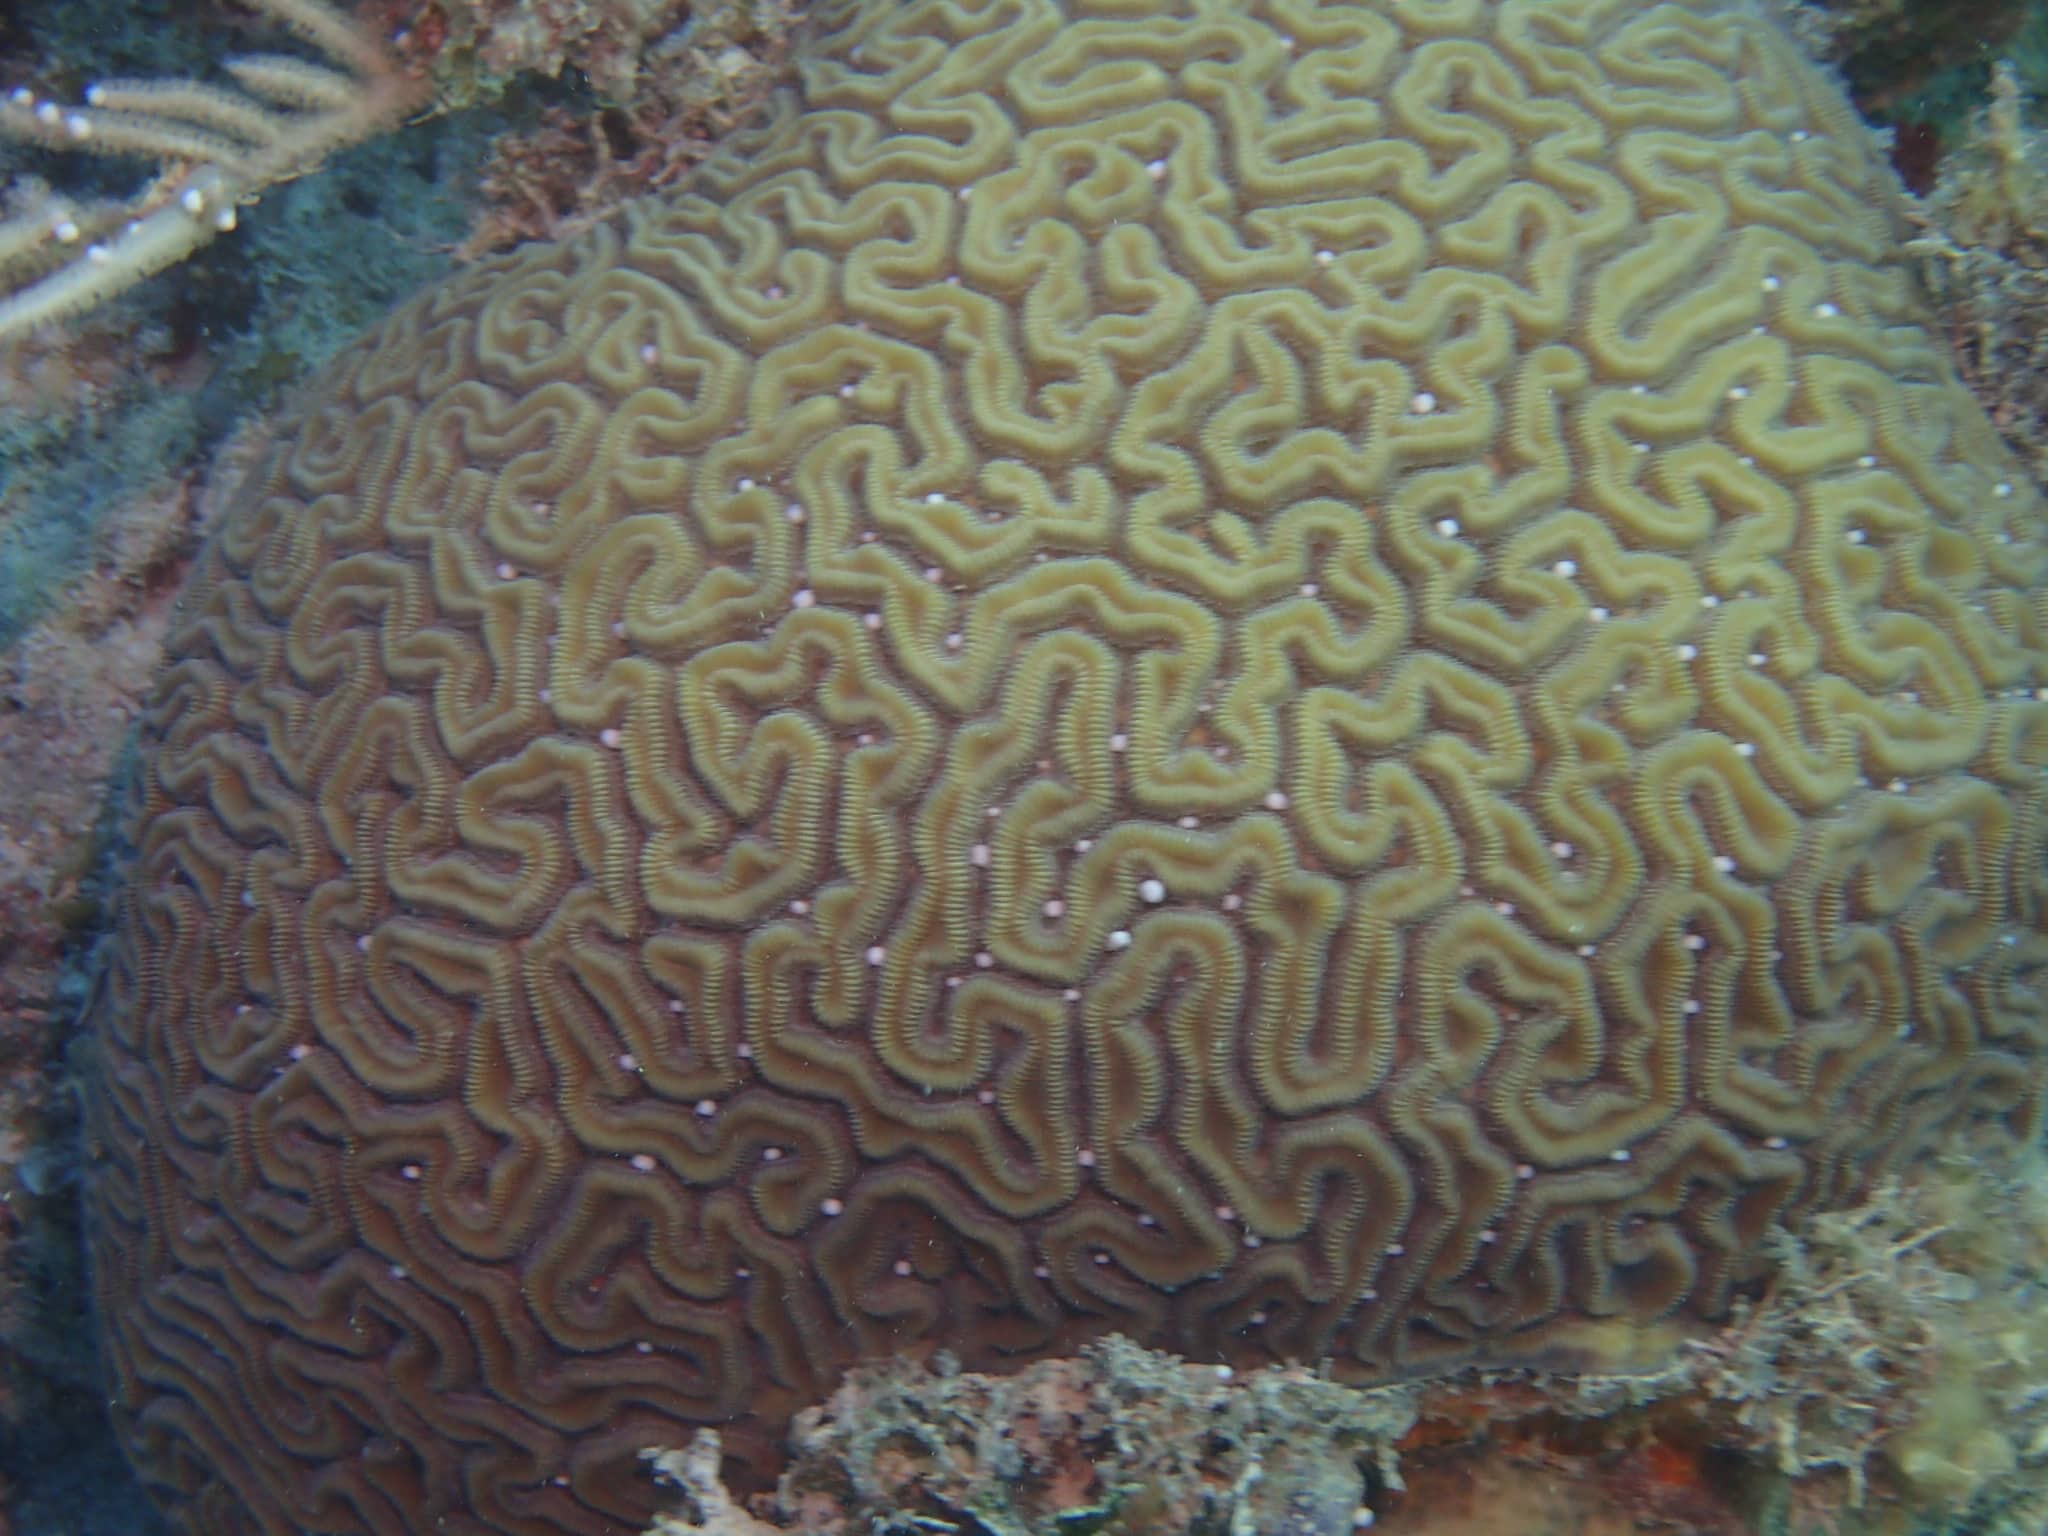 Spawning Of Brain Coral In Bayahibe - Cerebrus